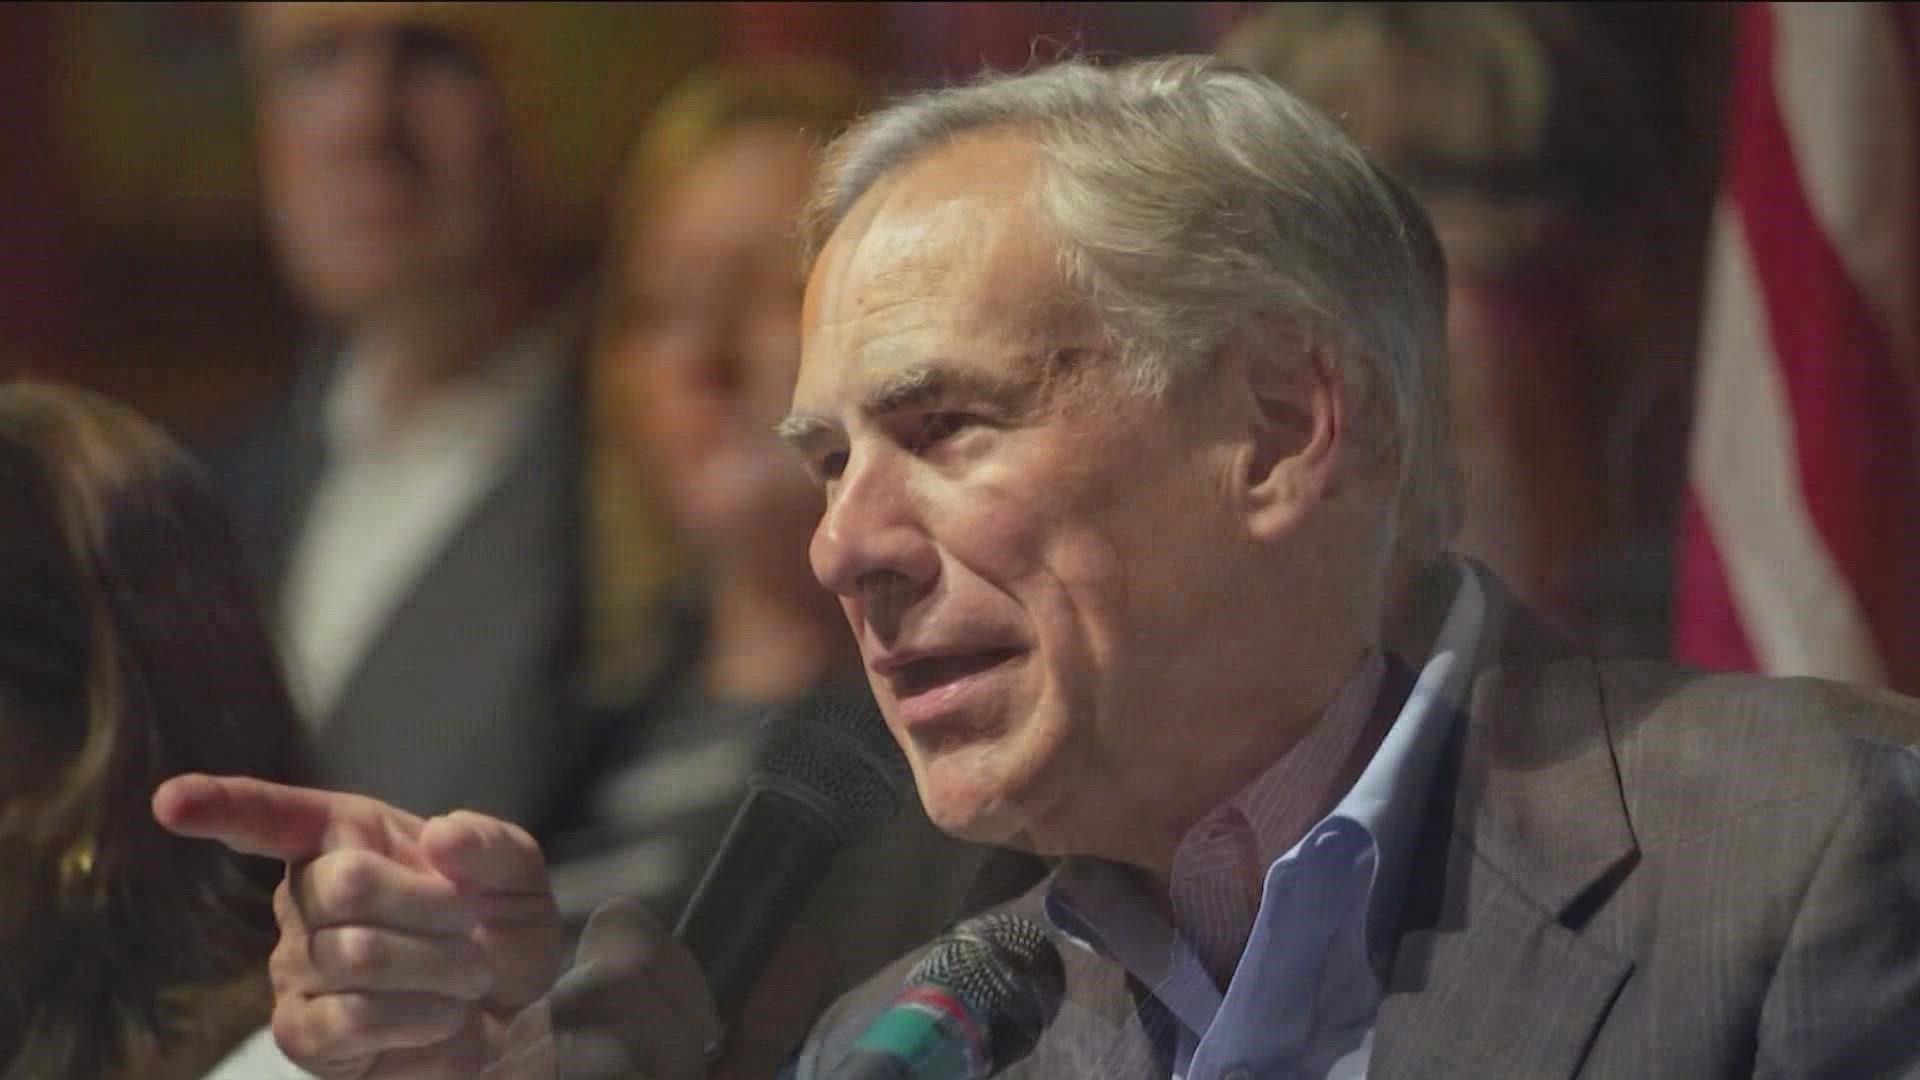 Gov. Greg Abbott tweeted that he was invoking state and federal Invasion Clauses to authorize "unprecedented measures to defend our state against an invasion."